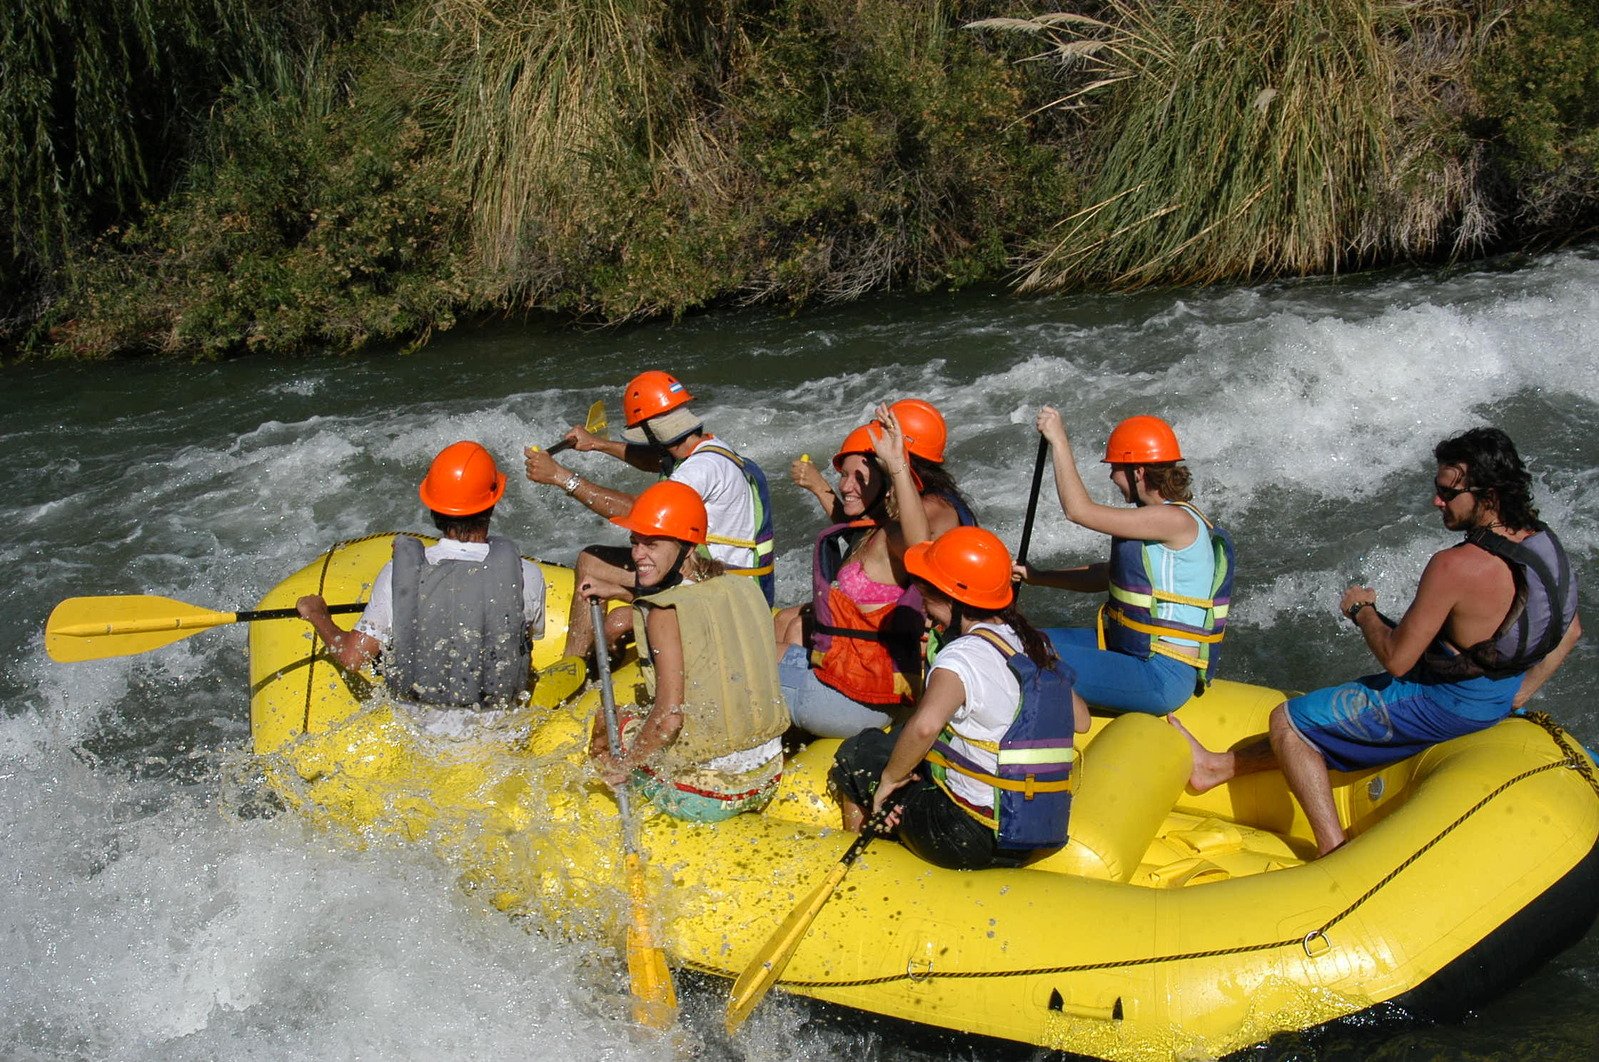 a group of people riding on the back of a yellow raft